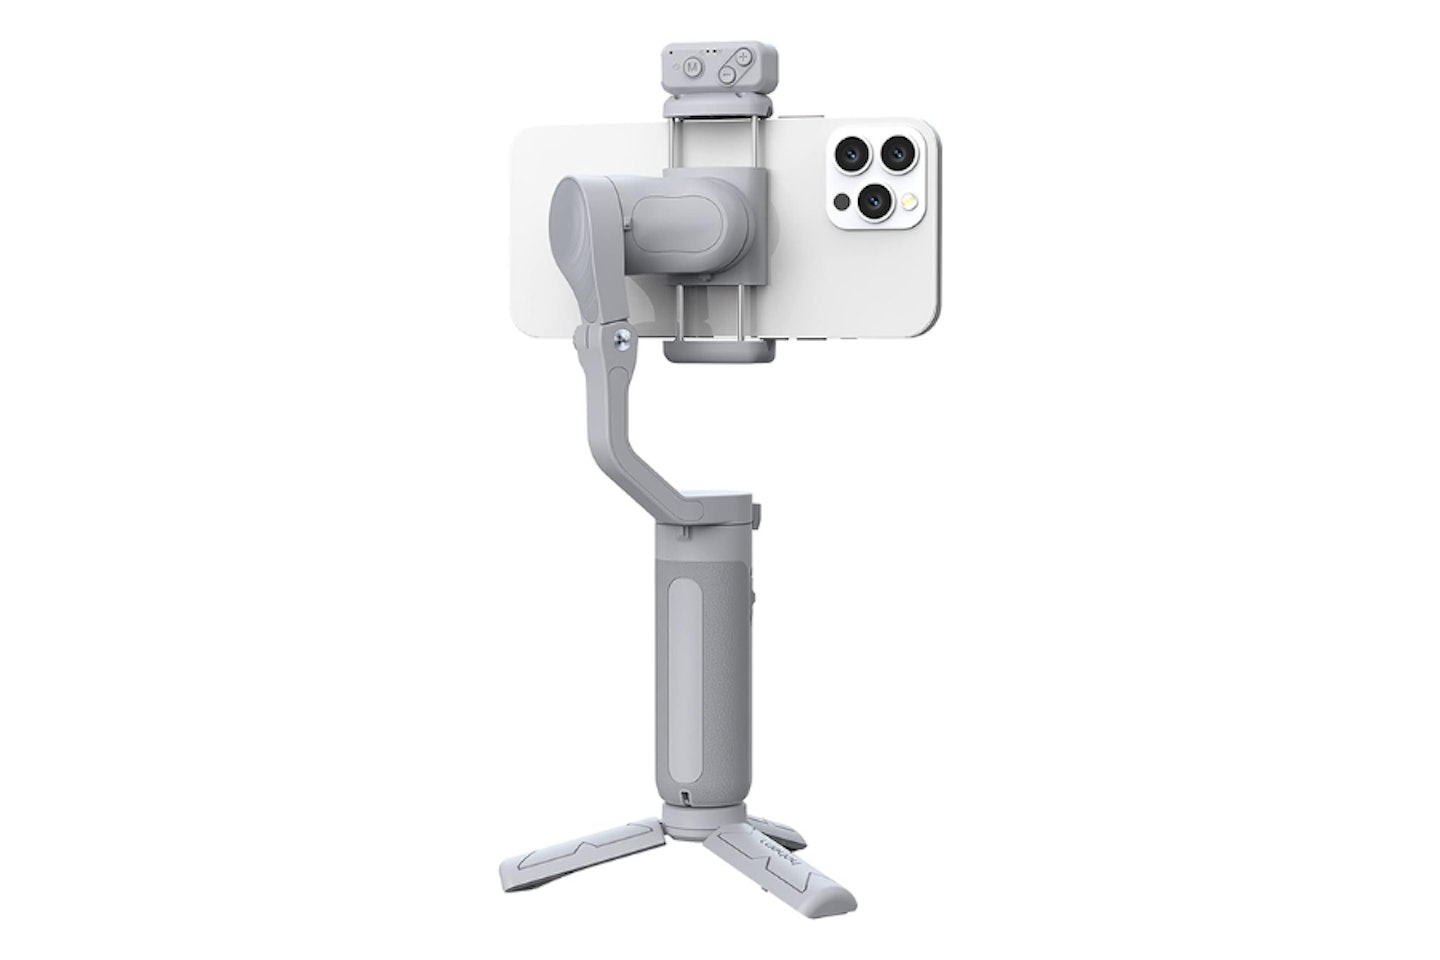 hohem iSteady XE Kit Gimbal Stabilizer - possibly the best smartphone gimbal